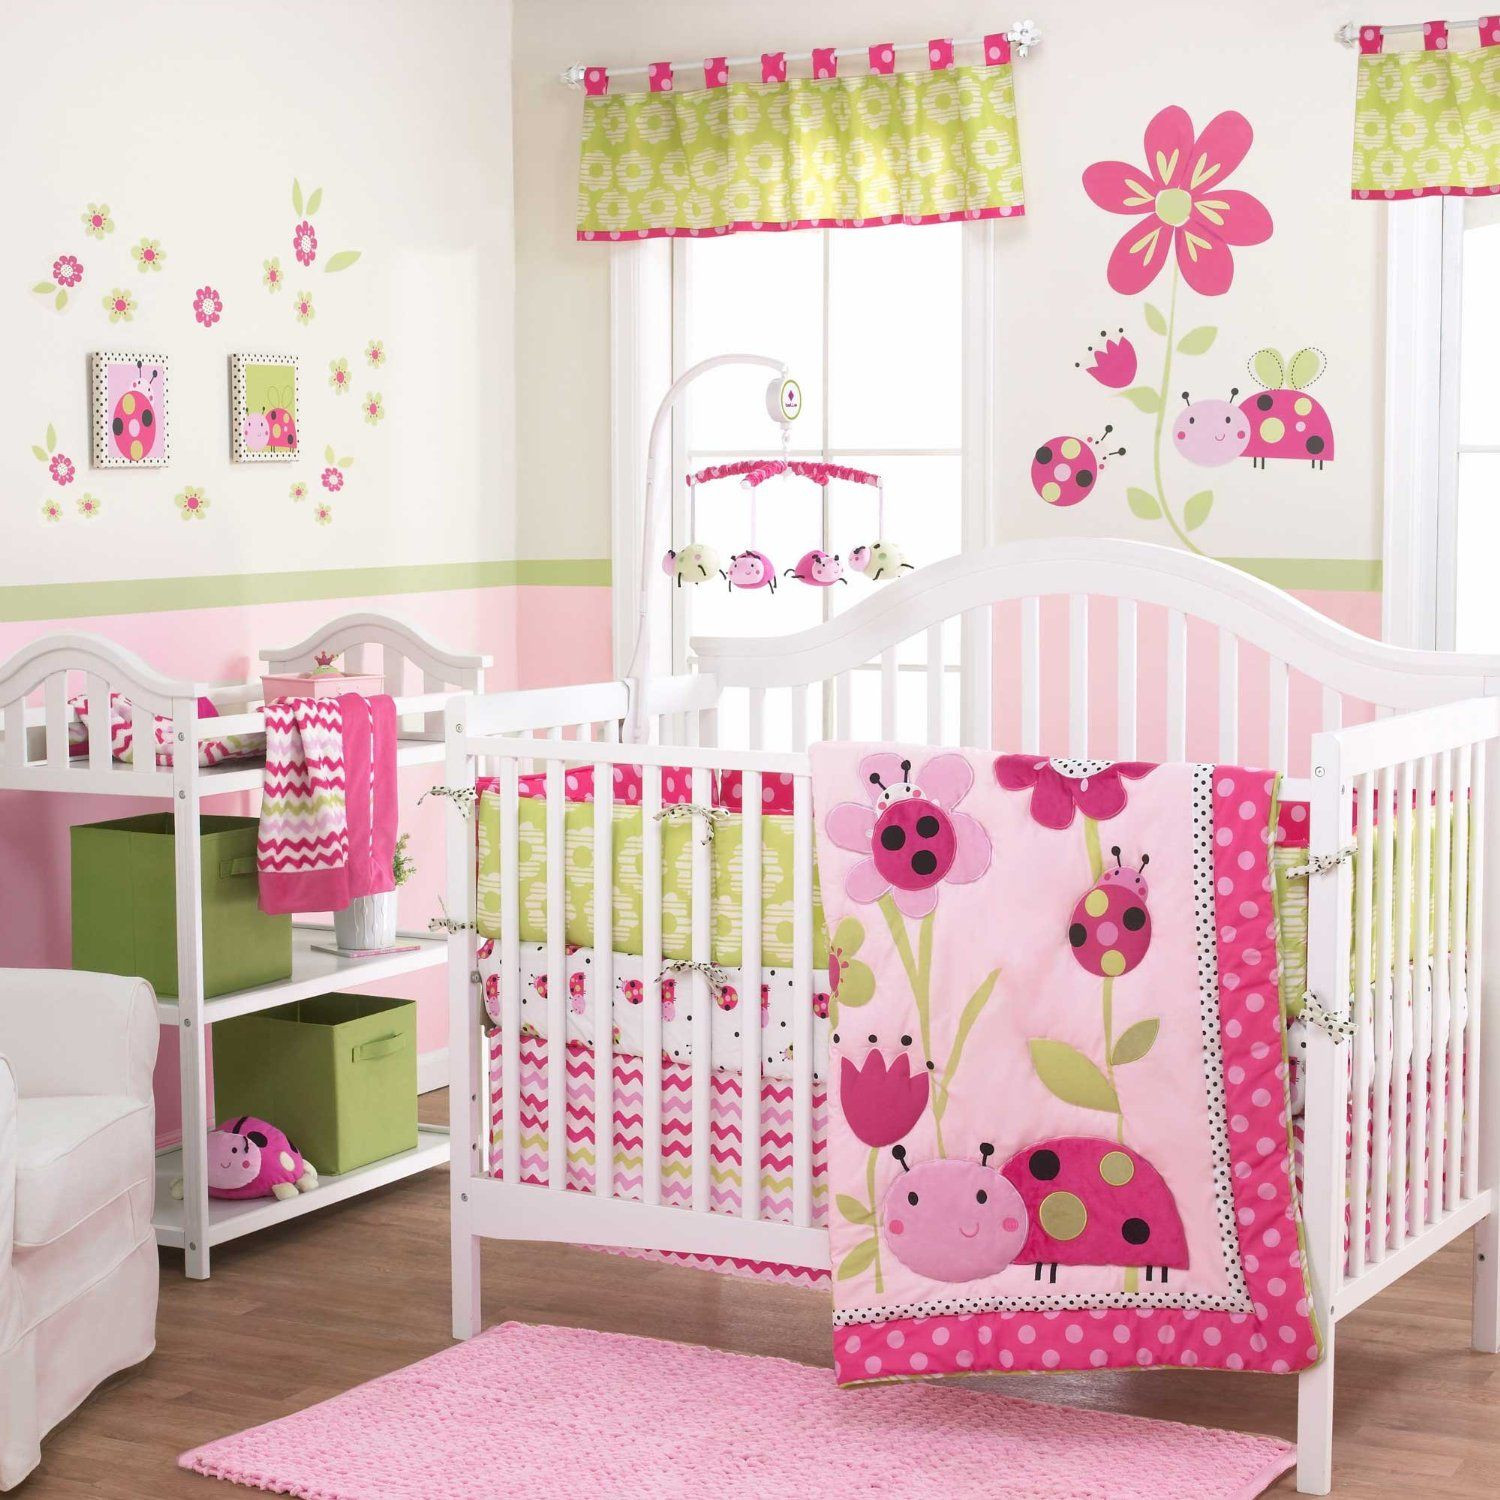 Belle Baby Bedding And Decor
 Belle Lil Ladybug Baby Bedding Collection